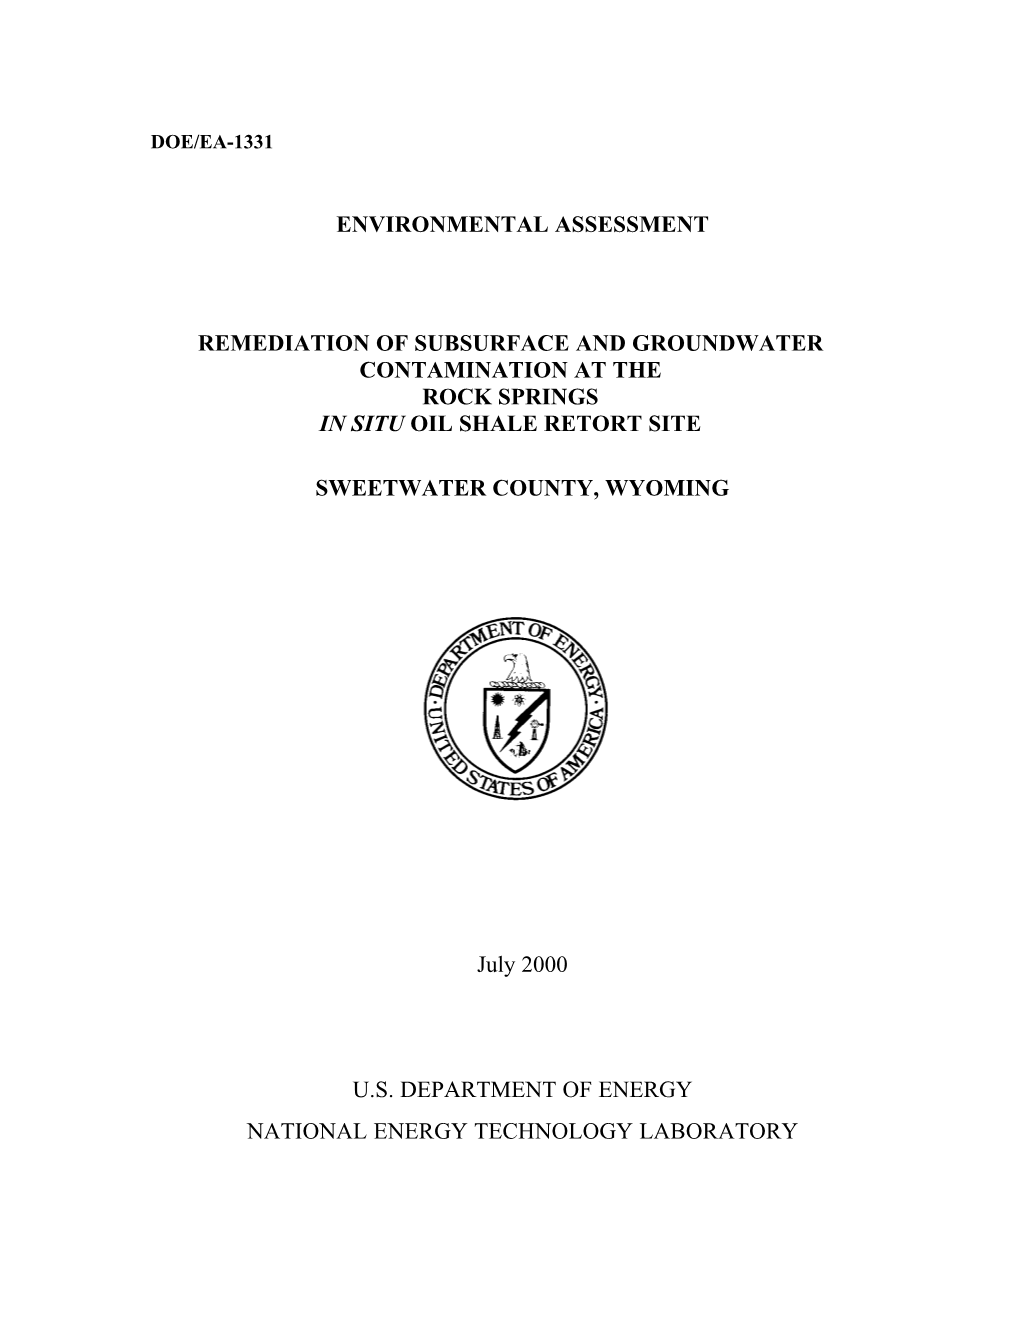 Environmental Assessment for Remediation of Subsurface and Groundwater Contamination at the Rock Springs in Situ Oil Shale Retort Test Site; Sweetwater County Wyoming